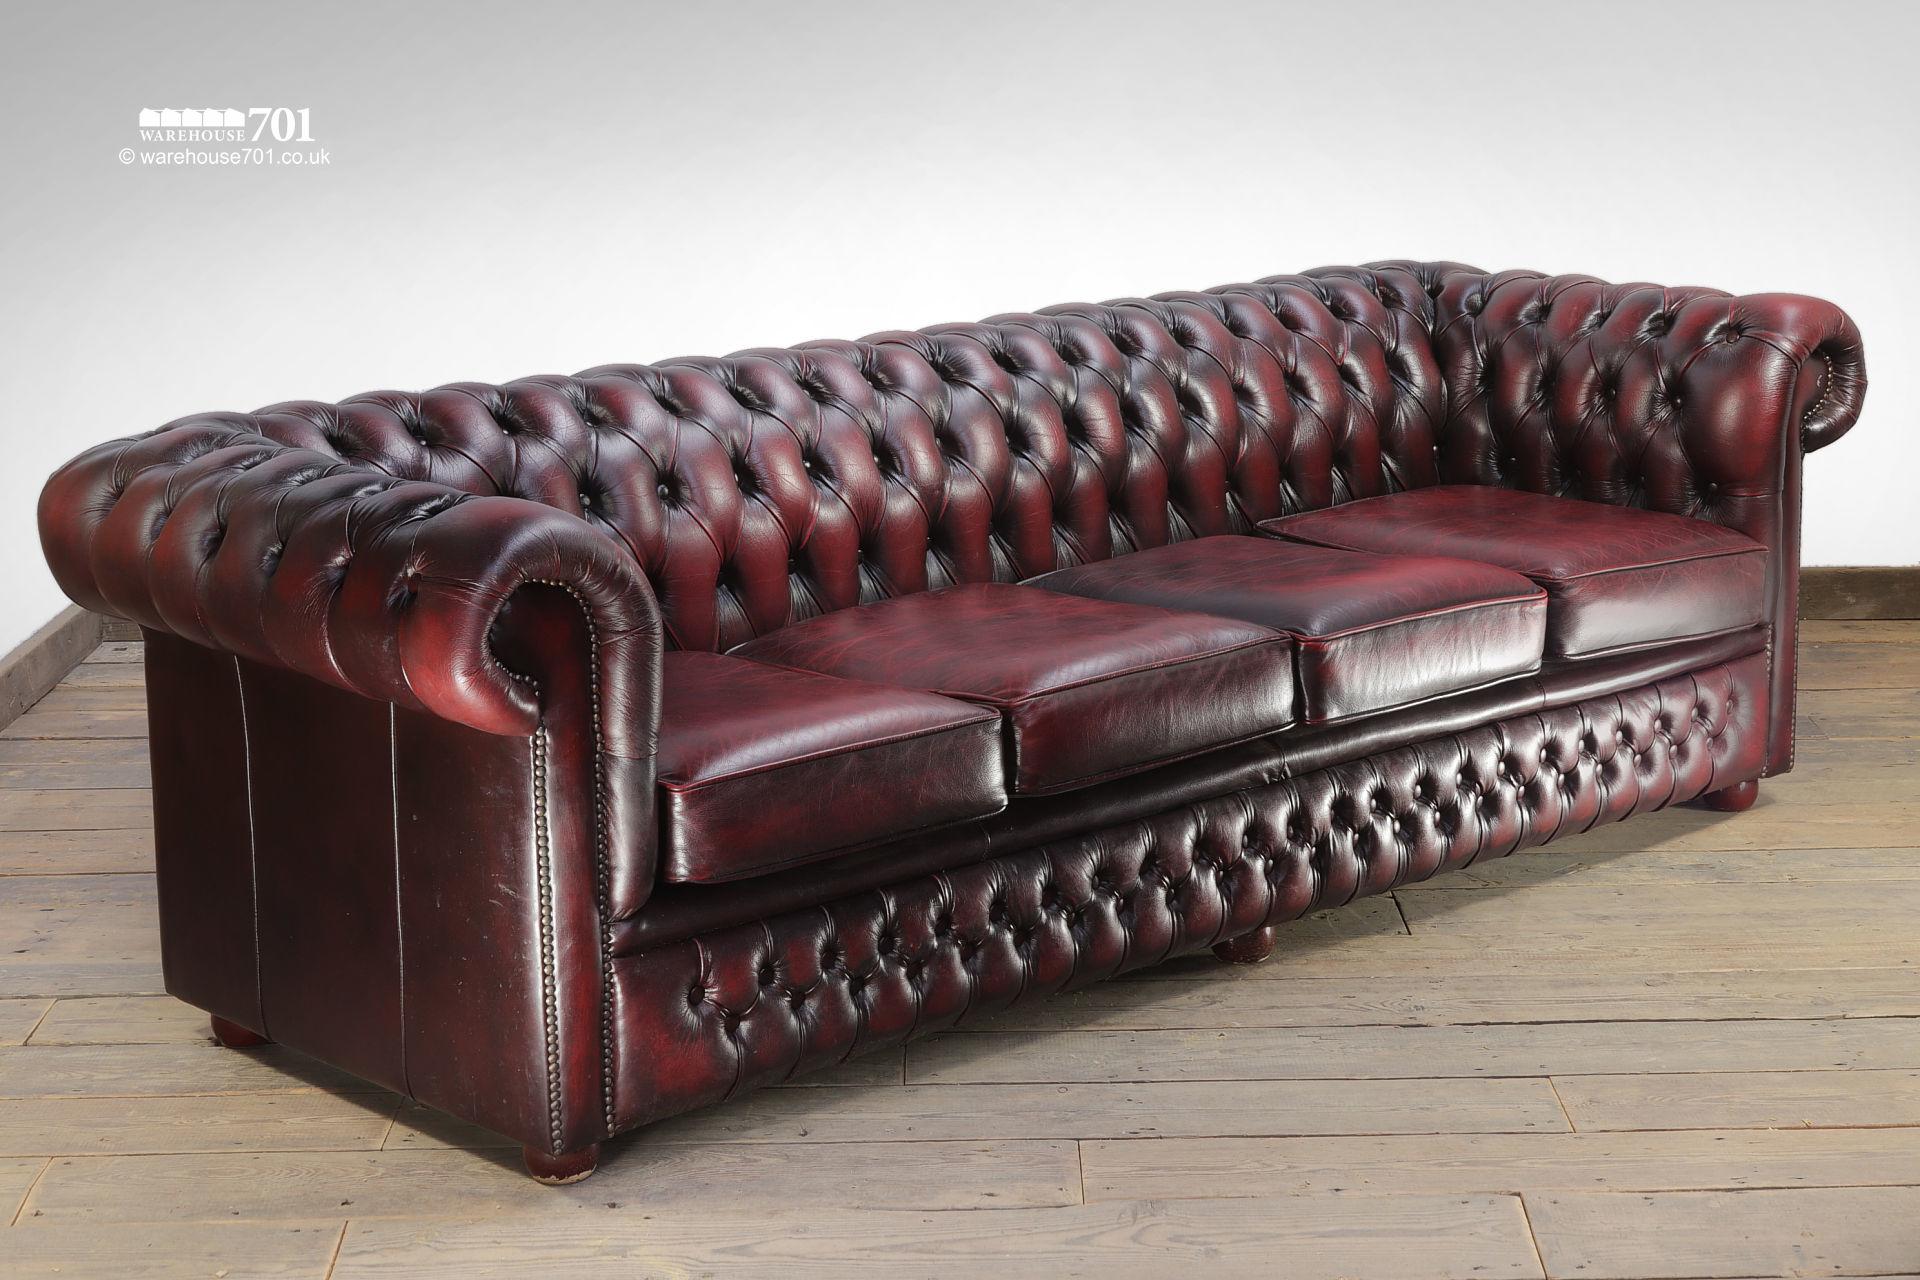 Reclaimed Four Seater Burgundy Leather Chesterfield Sofa #3